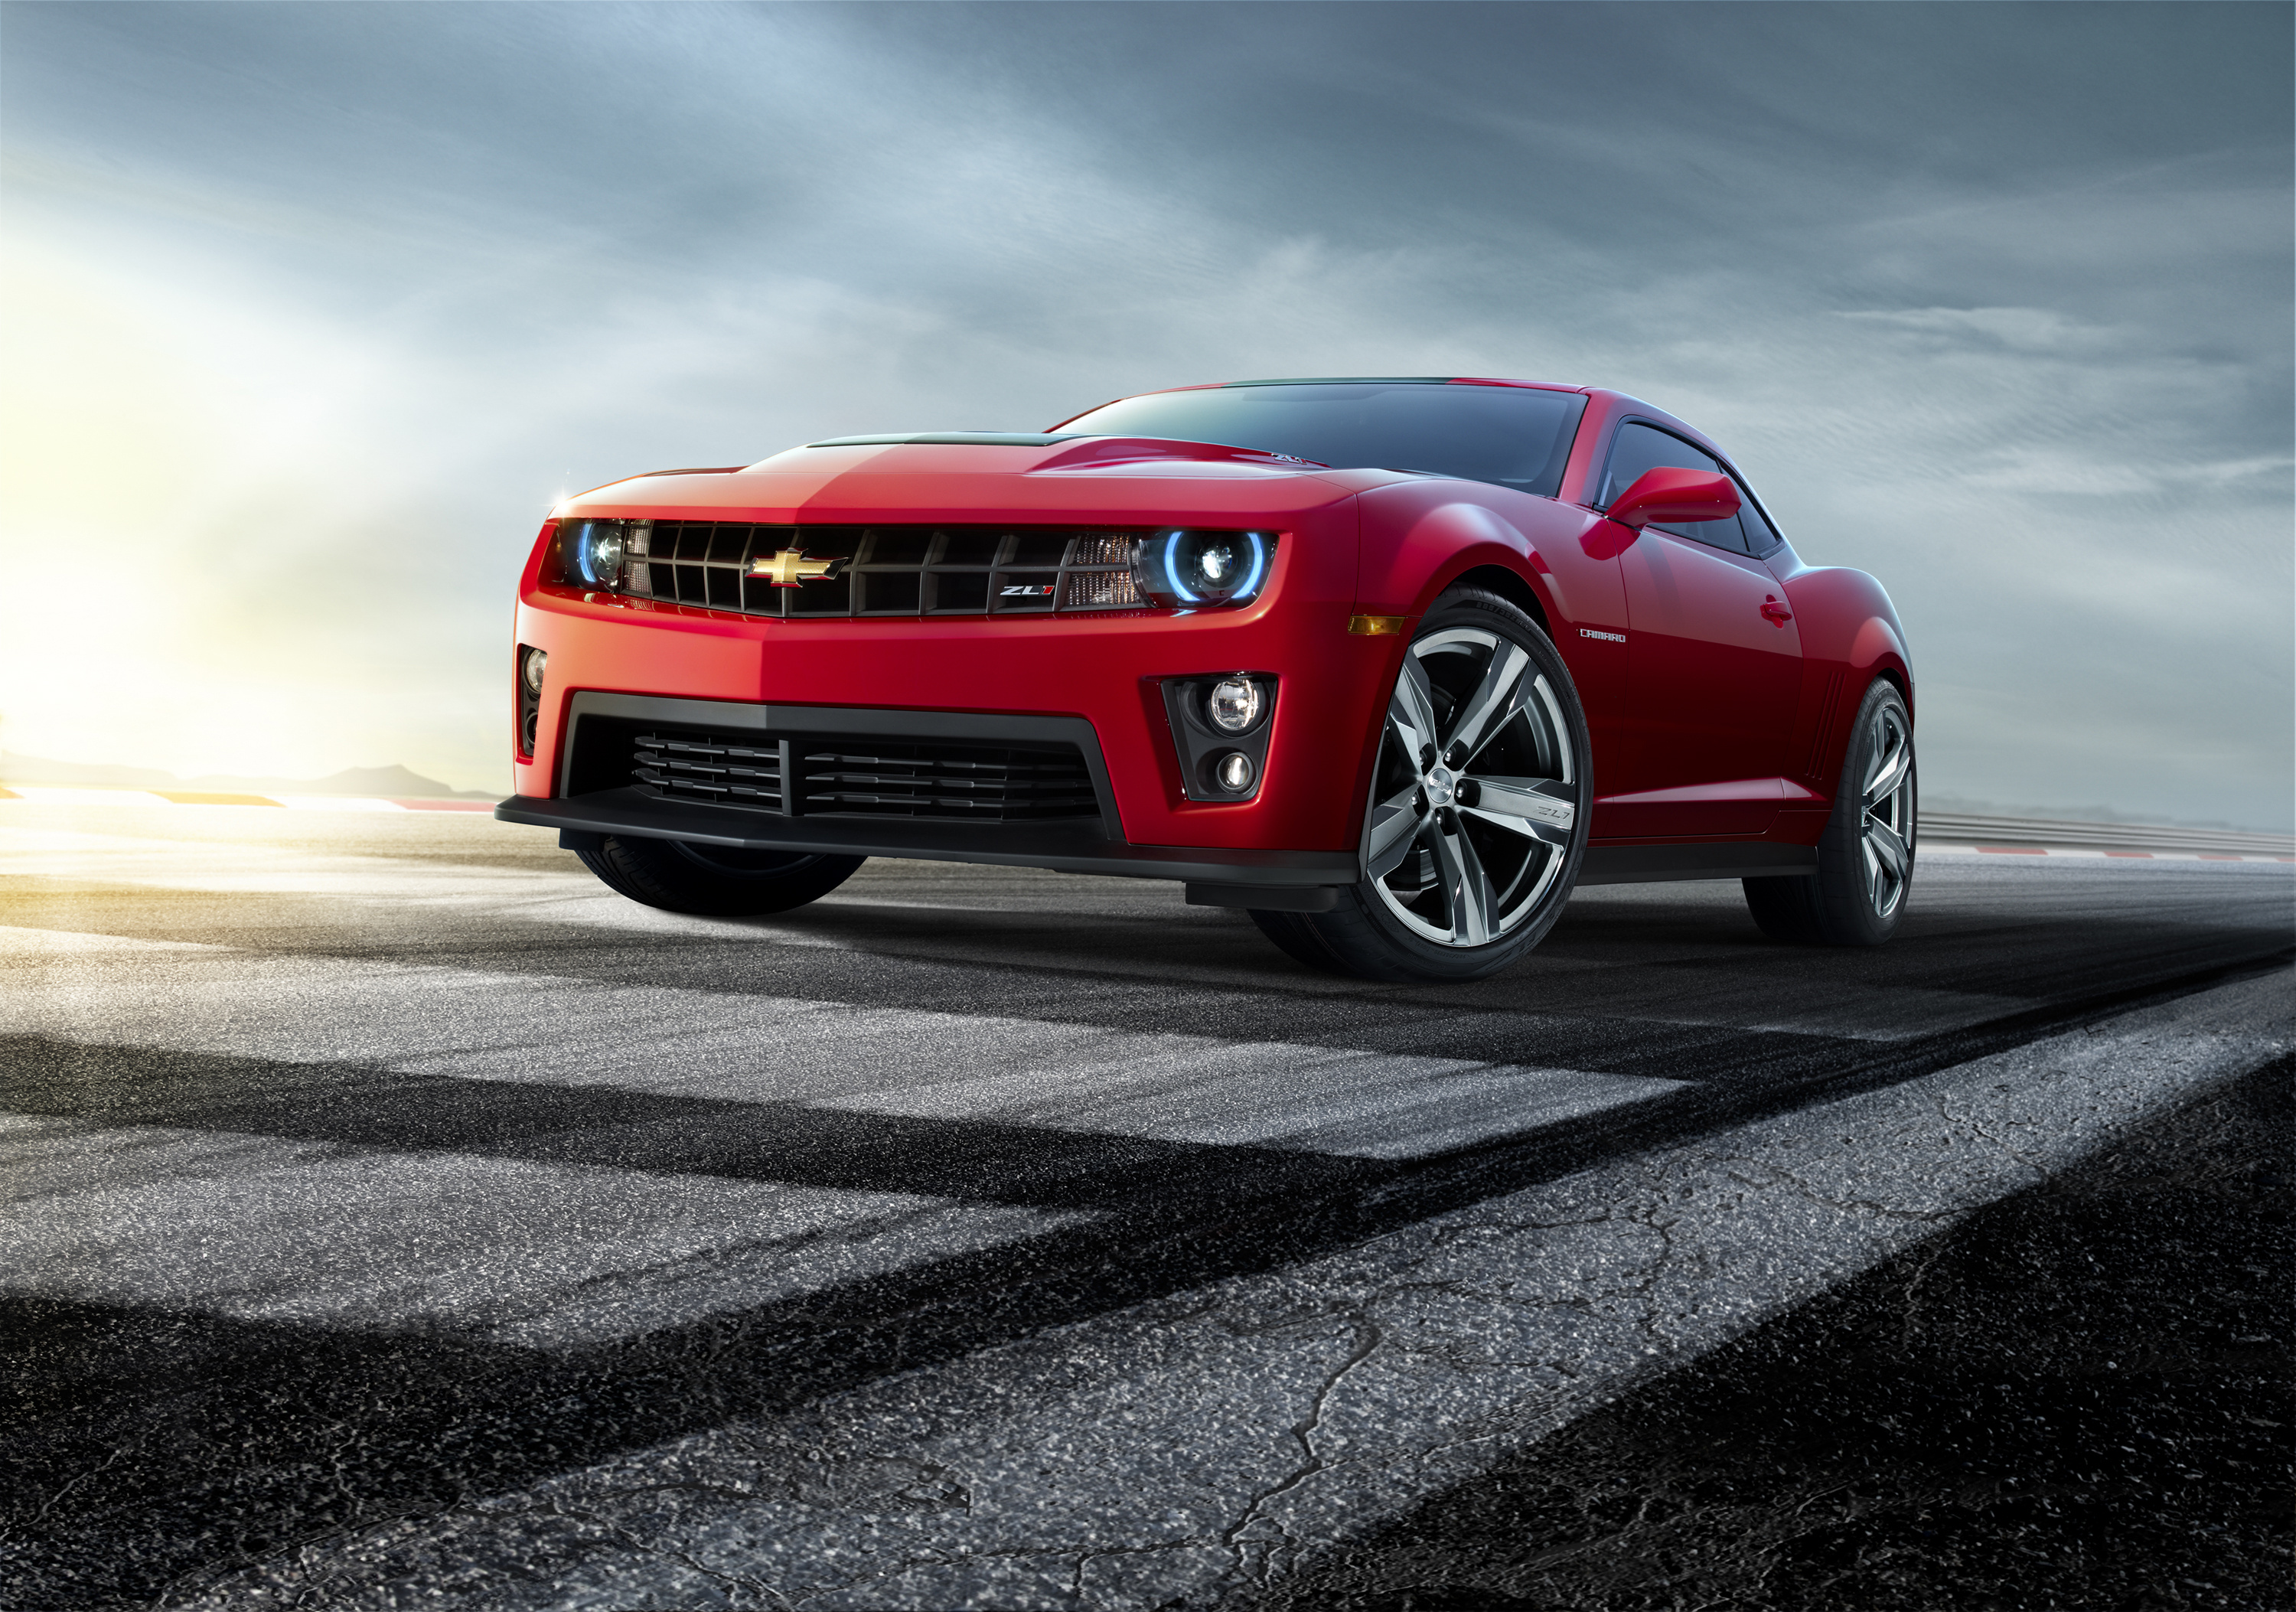 Camaro ZL1, High-definition wallpapers, Muscle car beauty, Stylish and powerful, American sports car, 3000x2110 HD Desktop